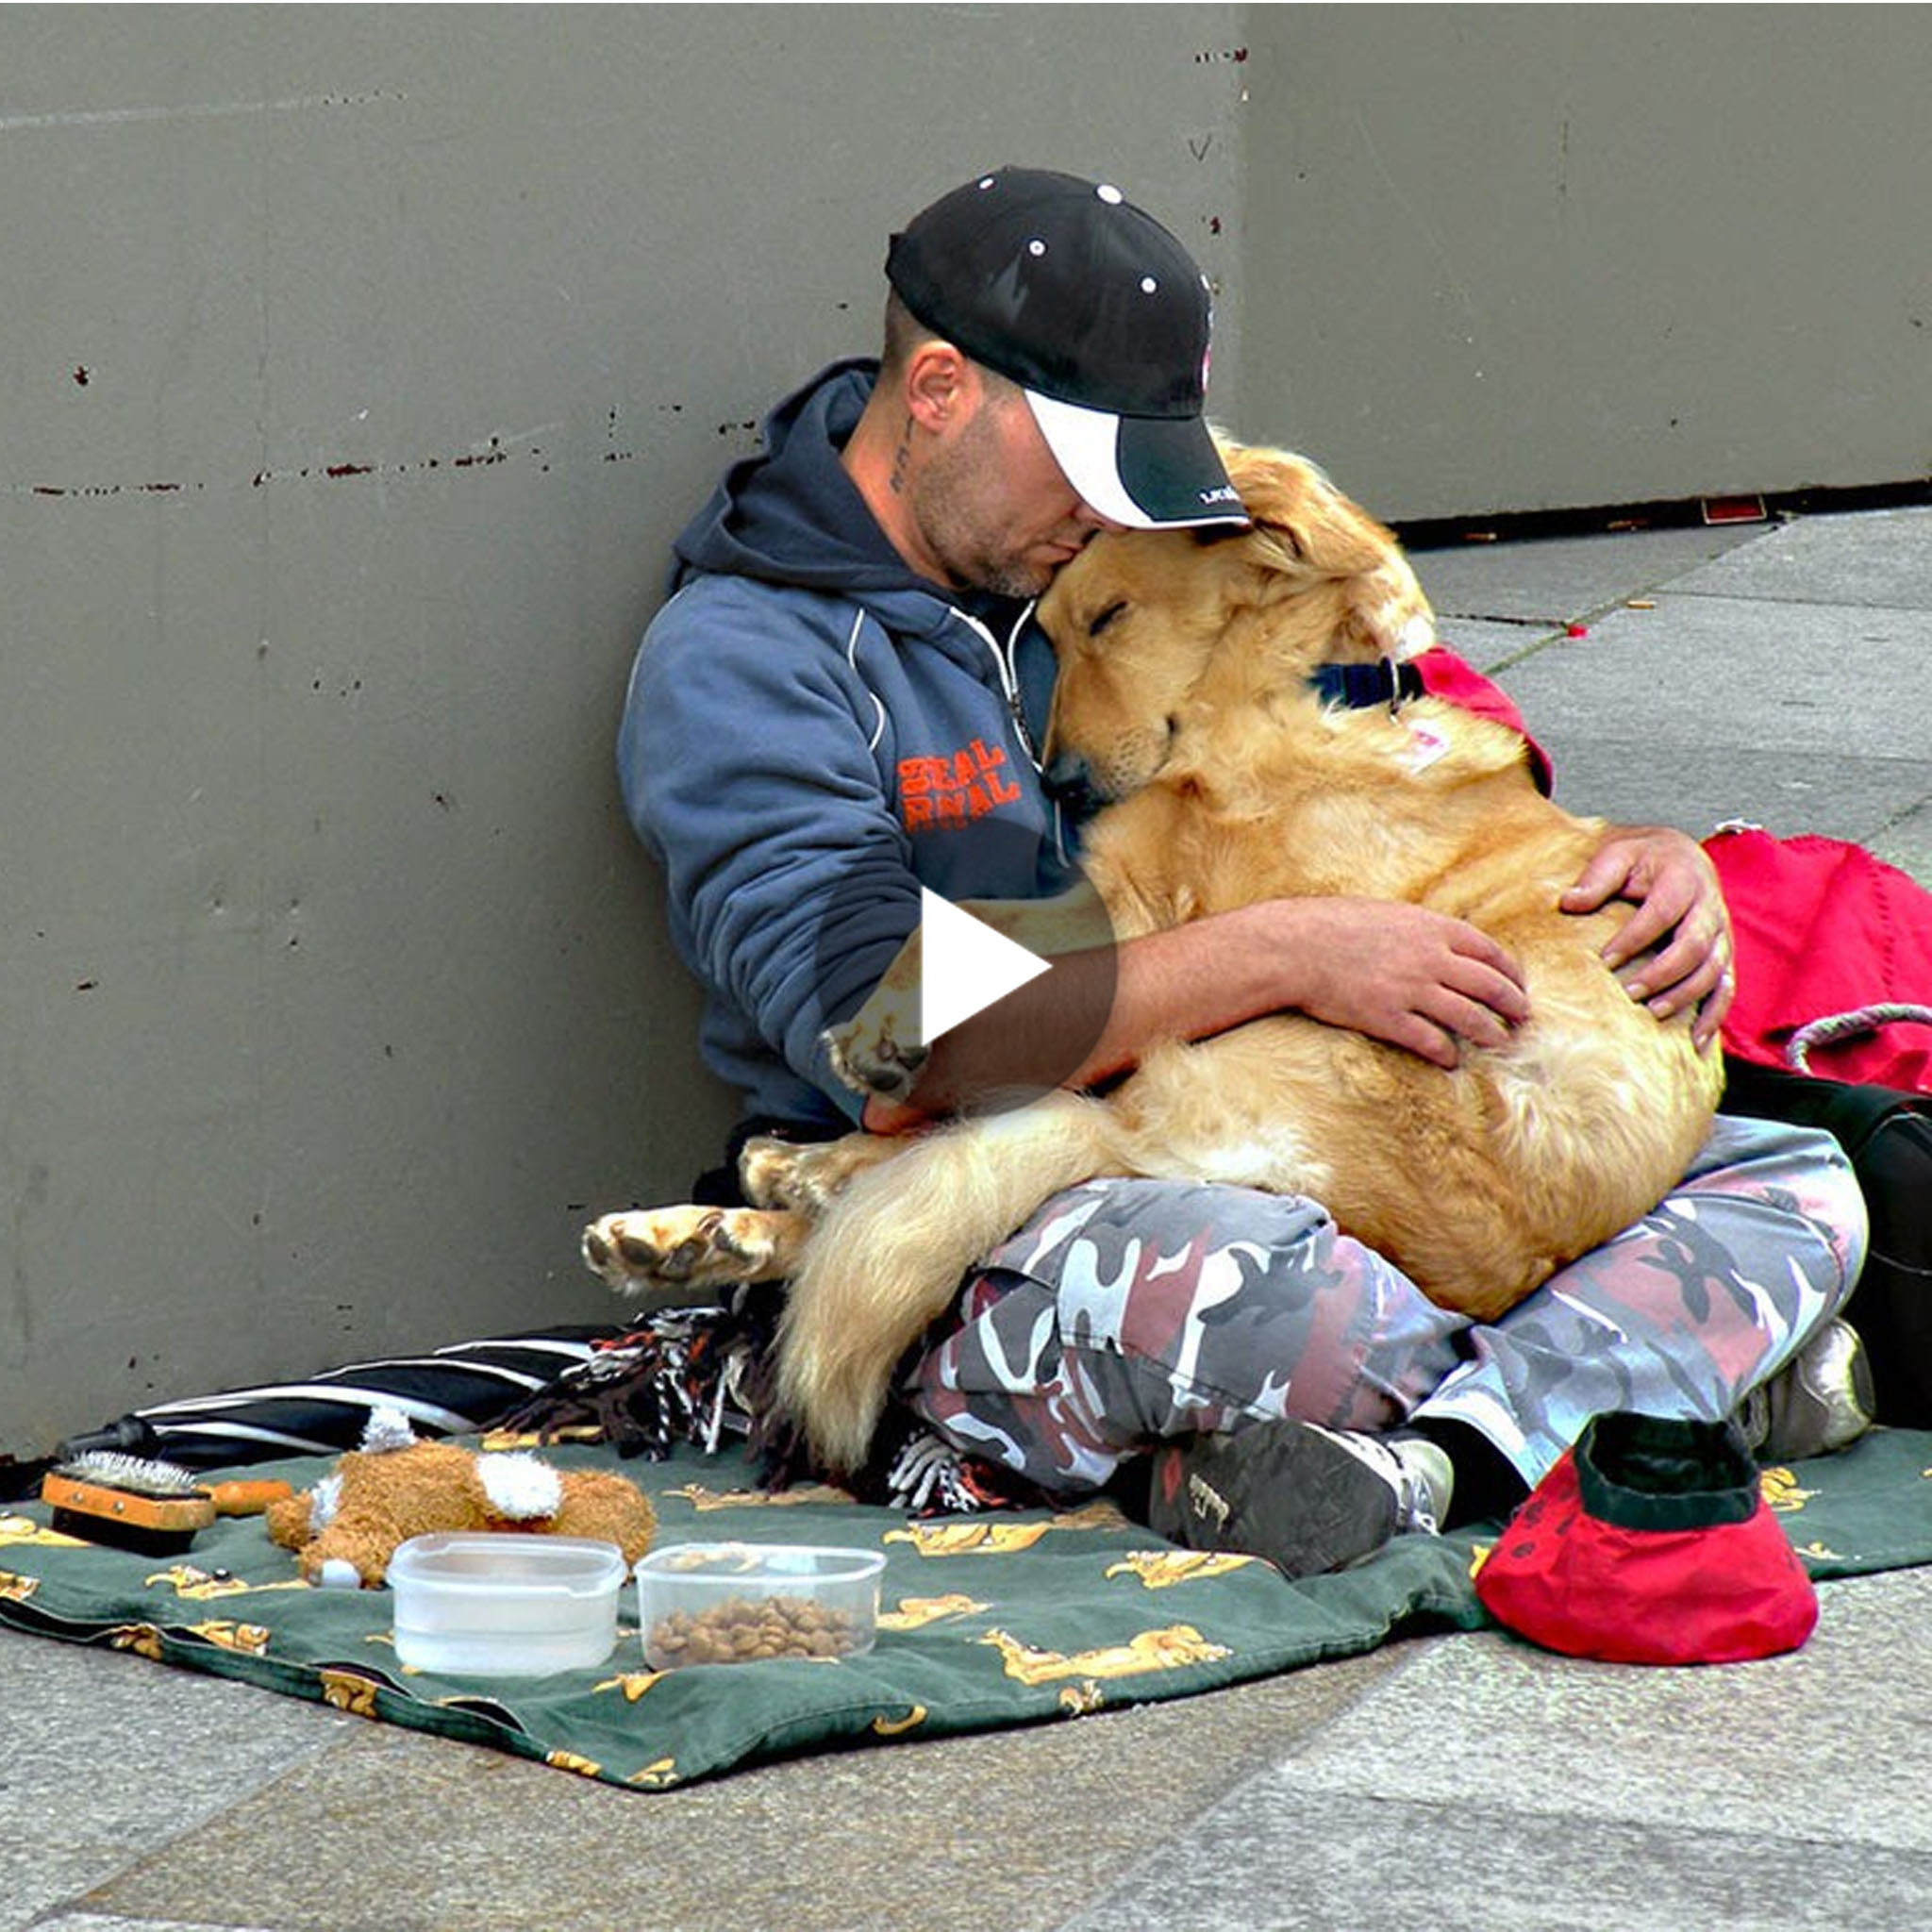 tho “Not Alone in Homelessness: A Dog’s Loyalty Warms Hearts Amid Difficult Circumstances, Touching the Audience” tho